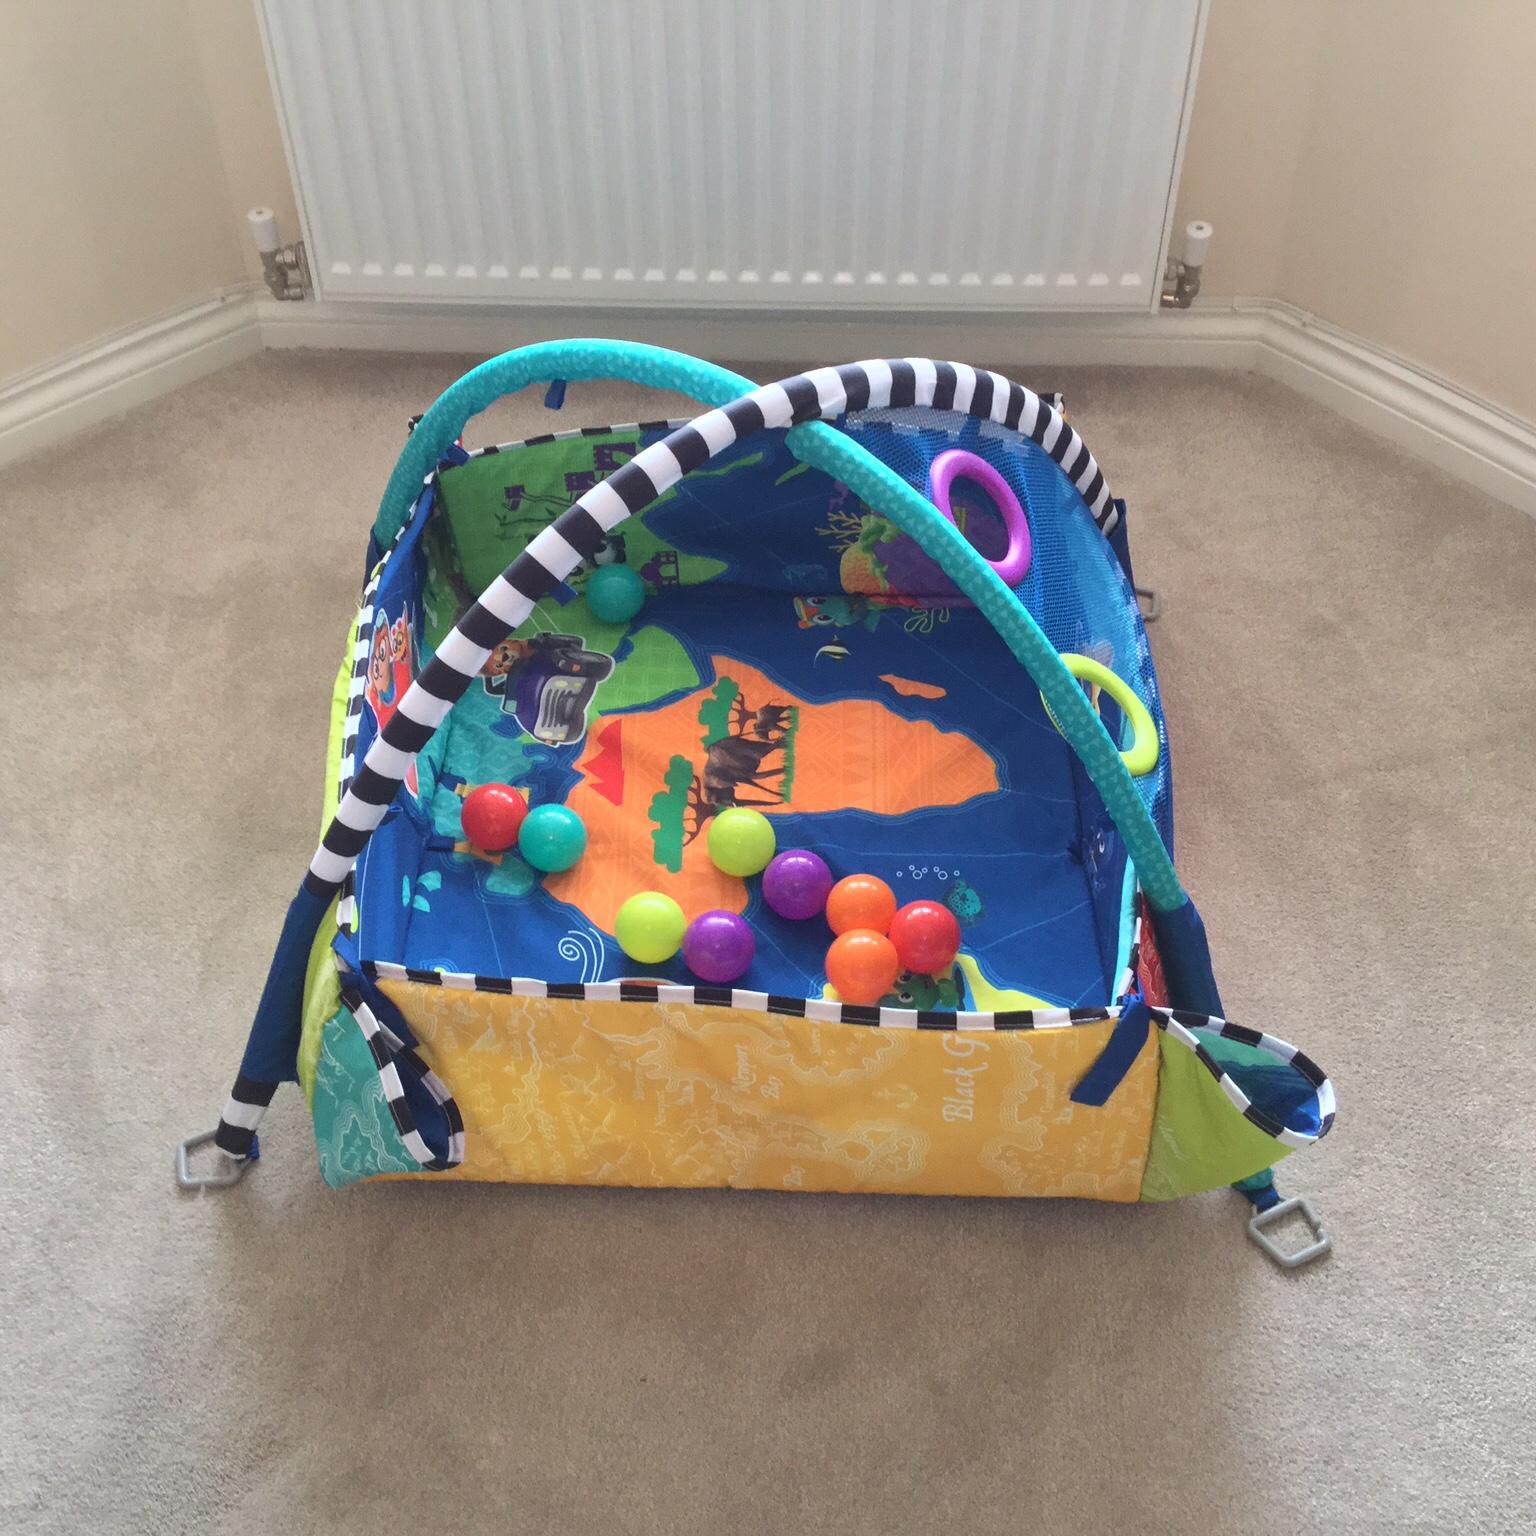 Baby Einstein Play Gym In De55 Bolsover For 25 00 For Sale Shpock